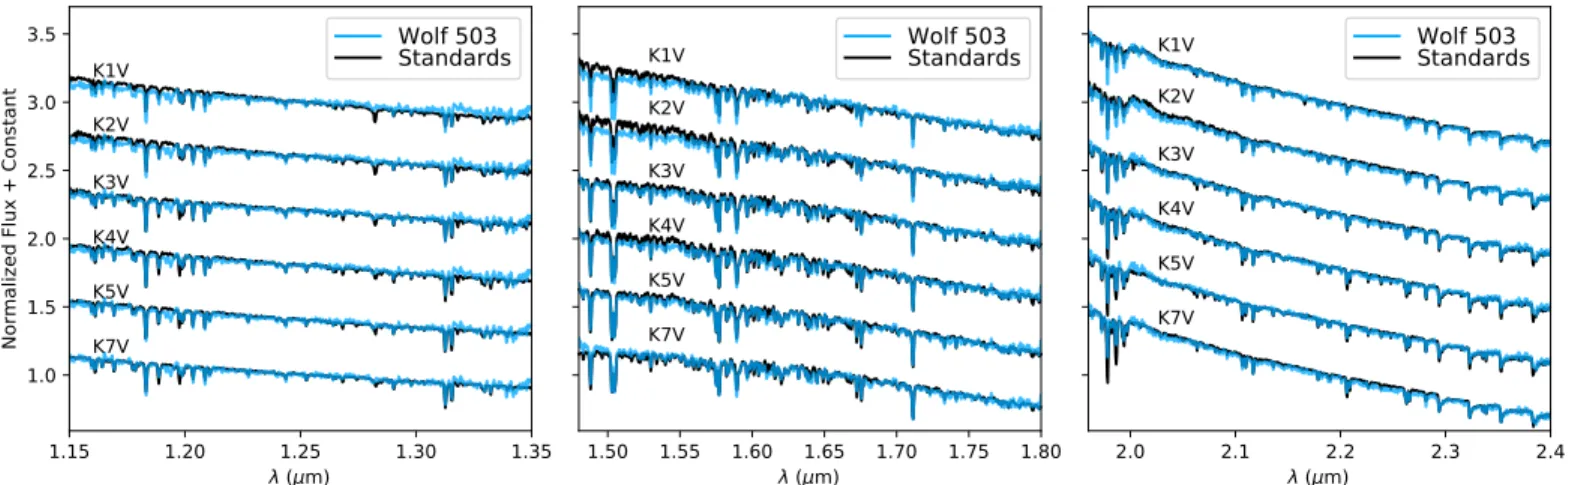 Figure 3. Final, calibrated SpeX spectra for Wolf  503, shown compared to spectral standards